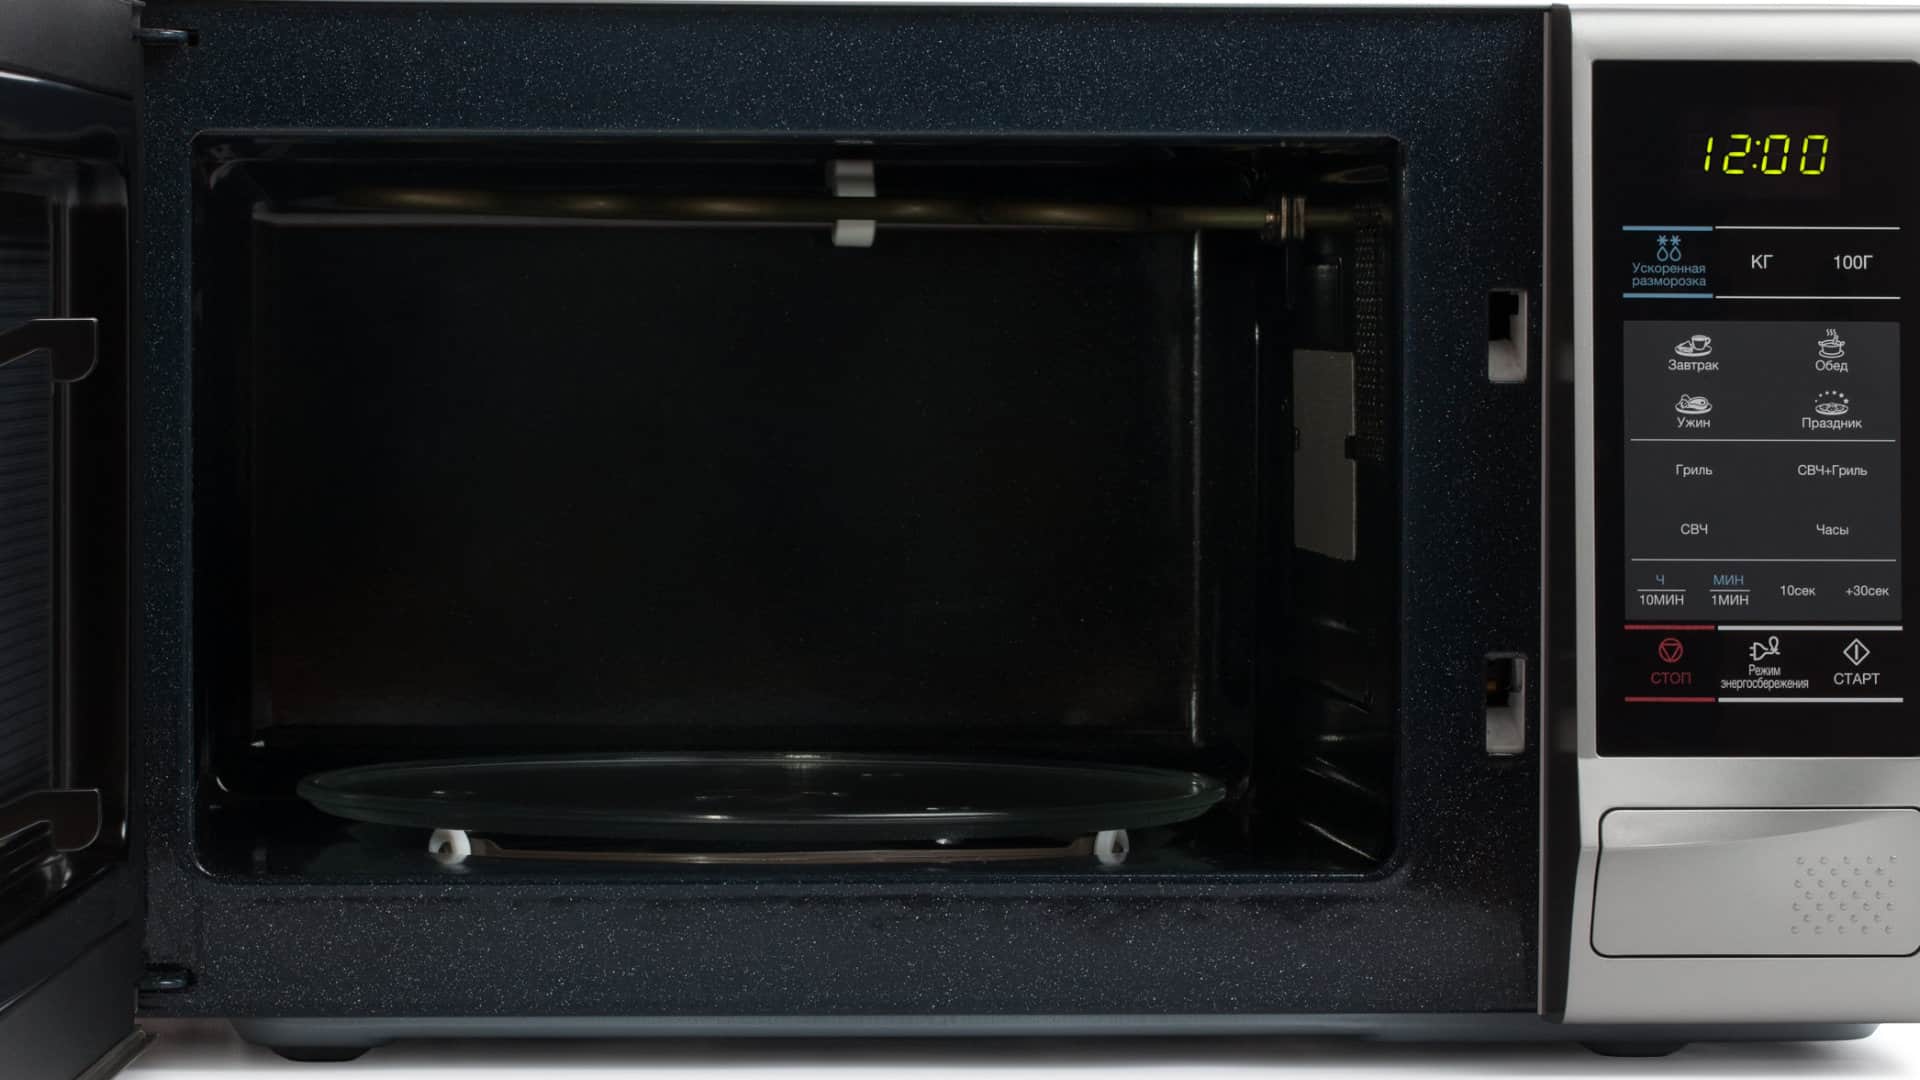 Featured image for “Microwave Noisy and Not Heating? Here’s What To Do”